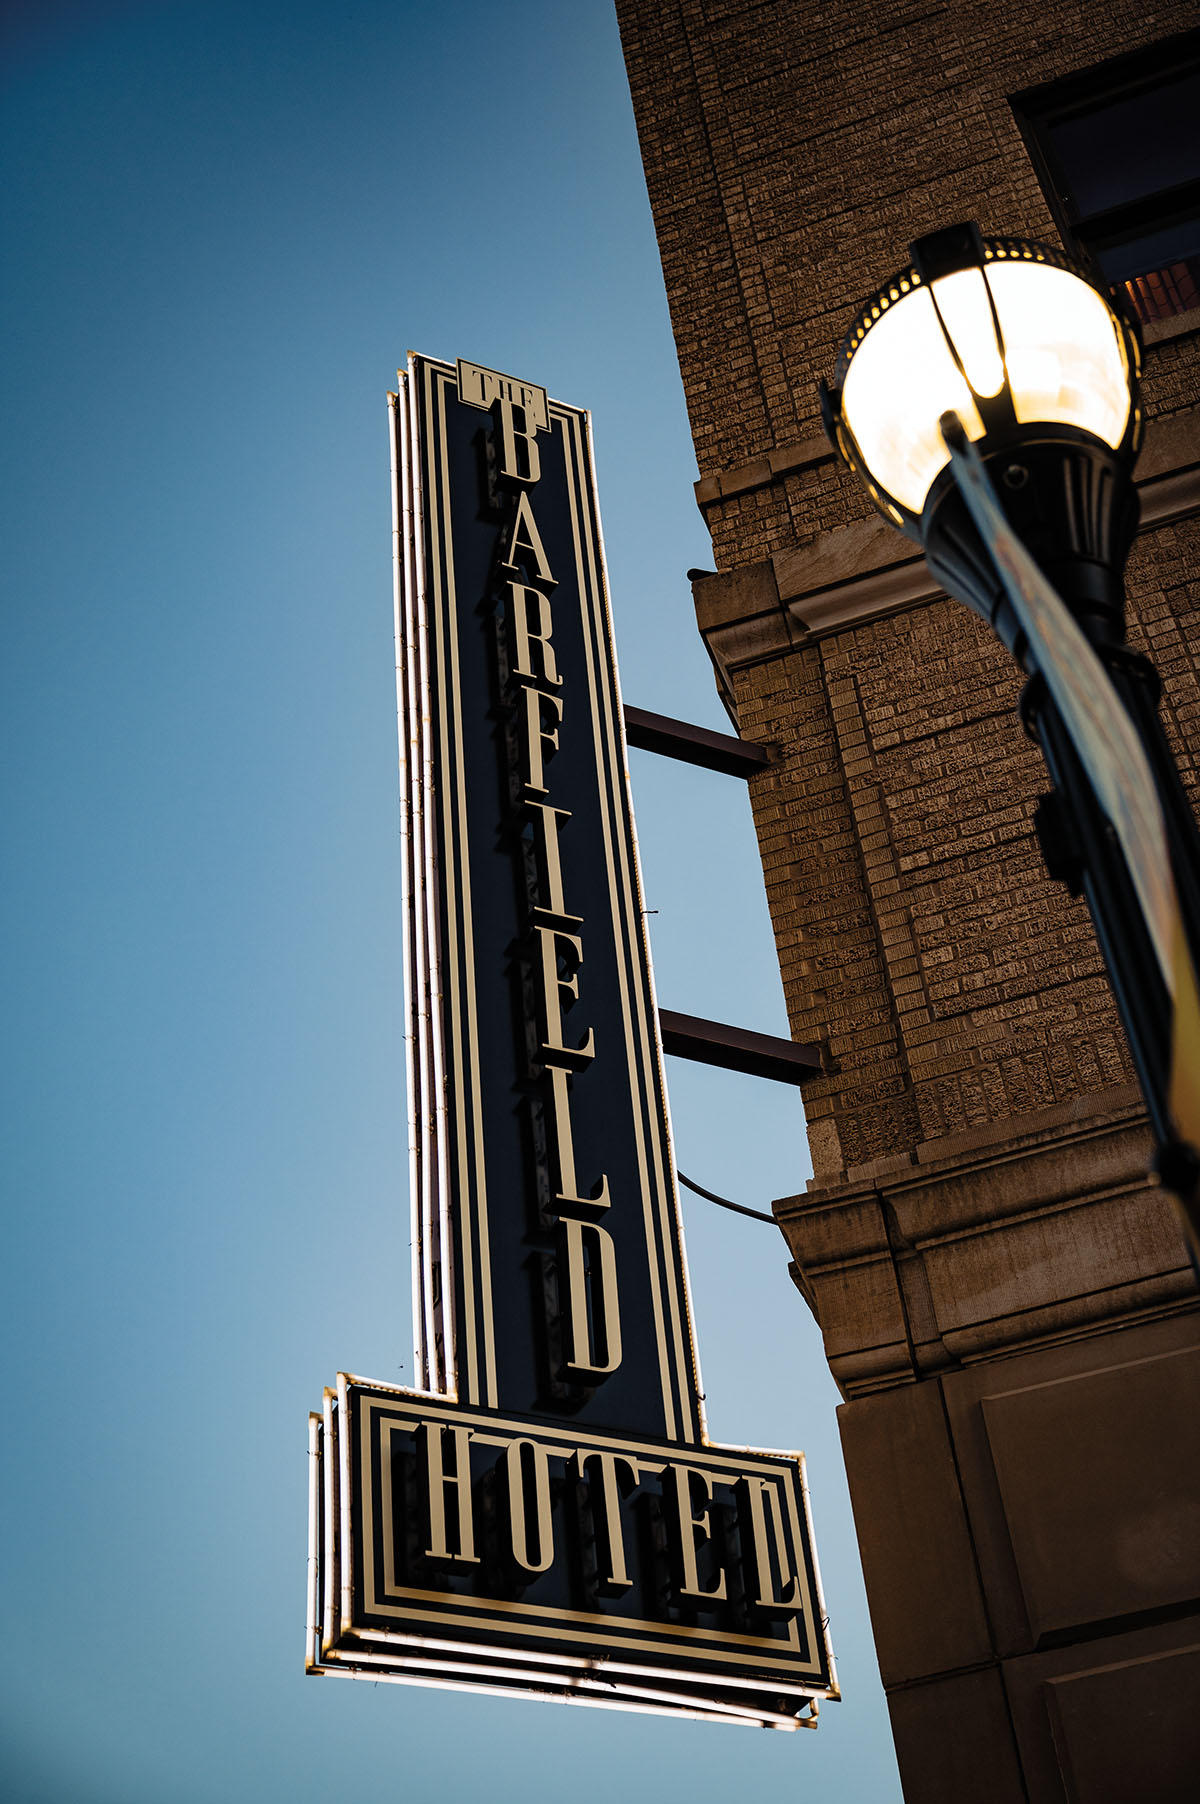 A midcentury styled sign reading "The Barfield Hotel" on the exterior of a brick building